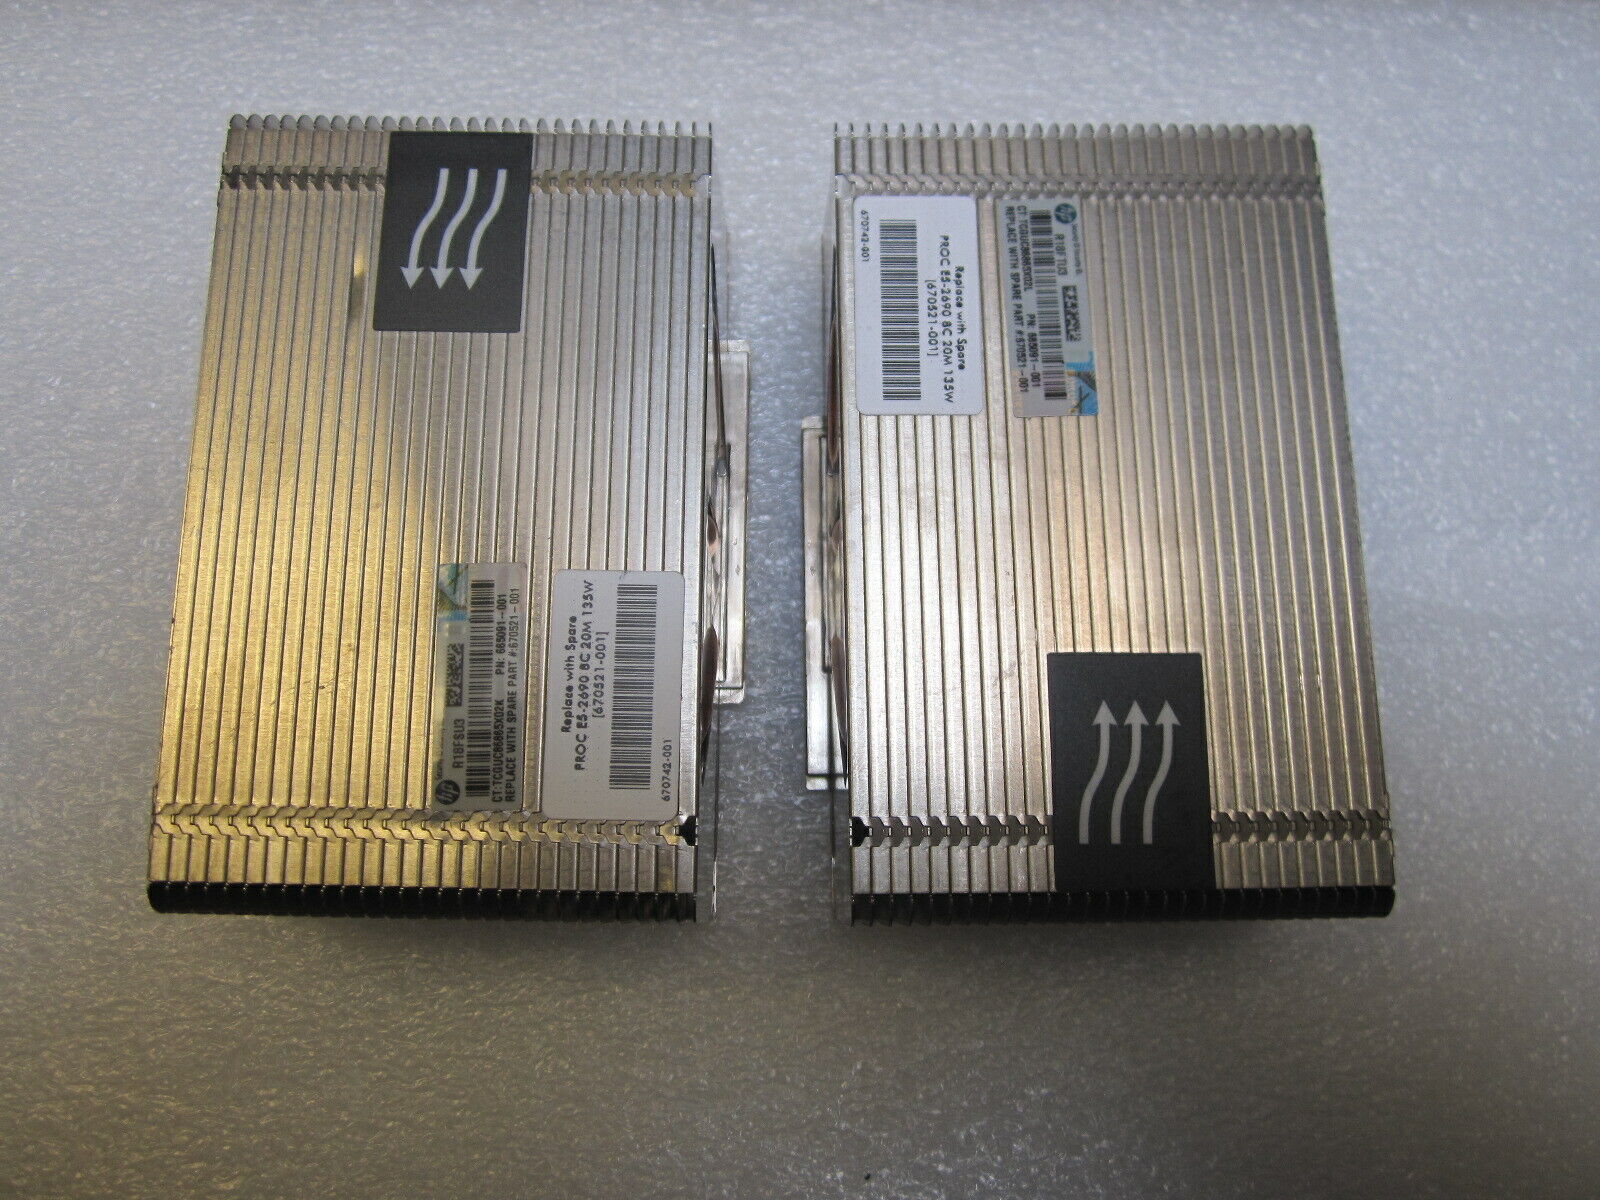 One pair of Genuine HP Heat Sink for HP Proliant 360P G8 665091-001 670521-001 